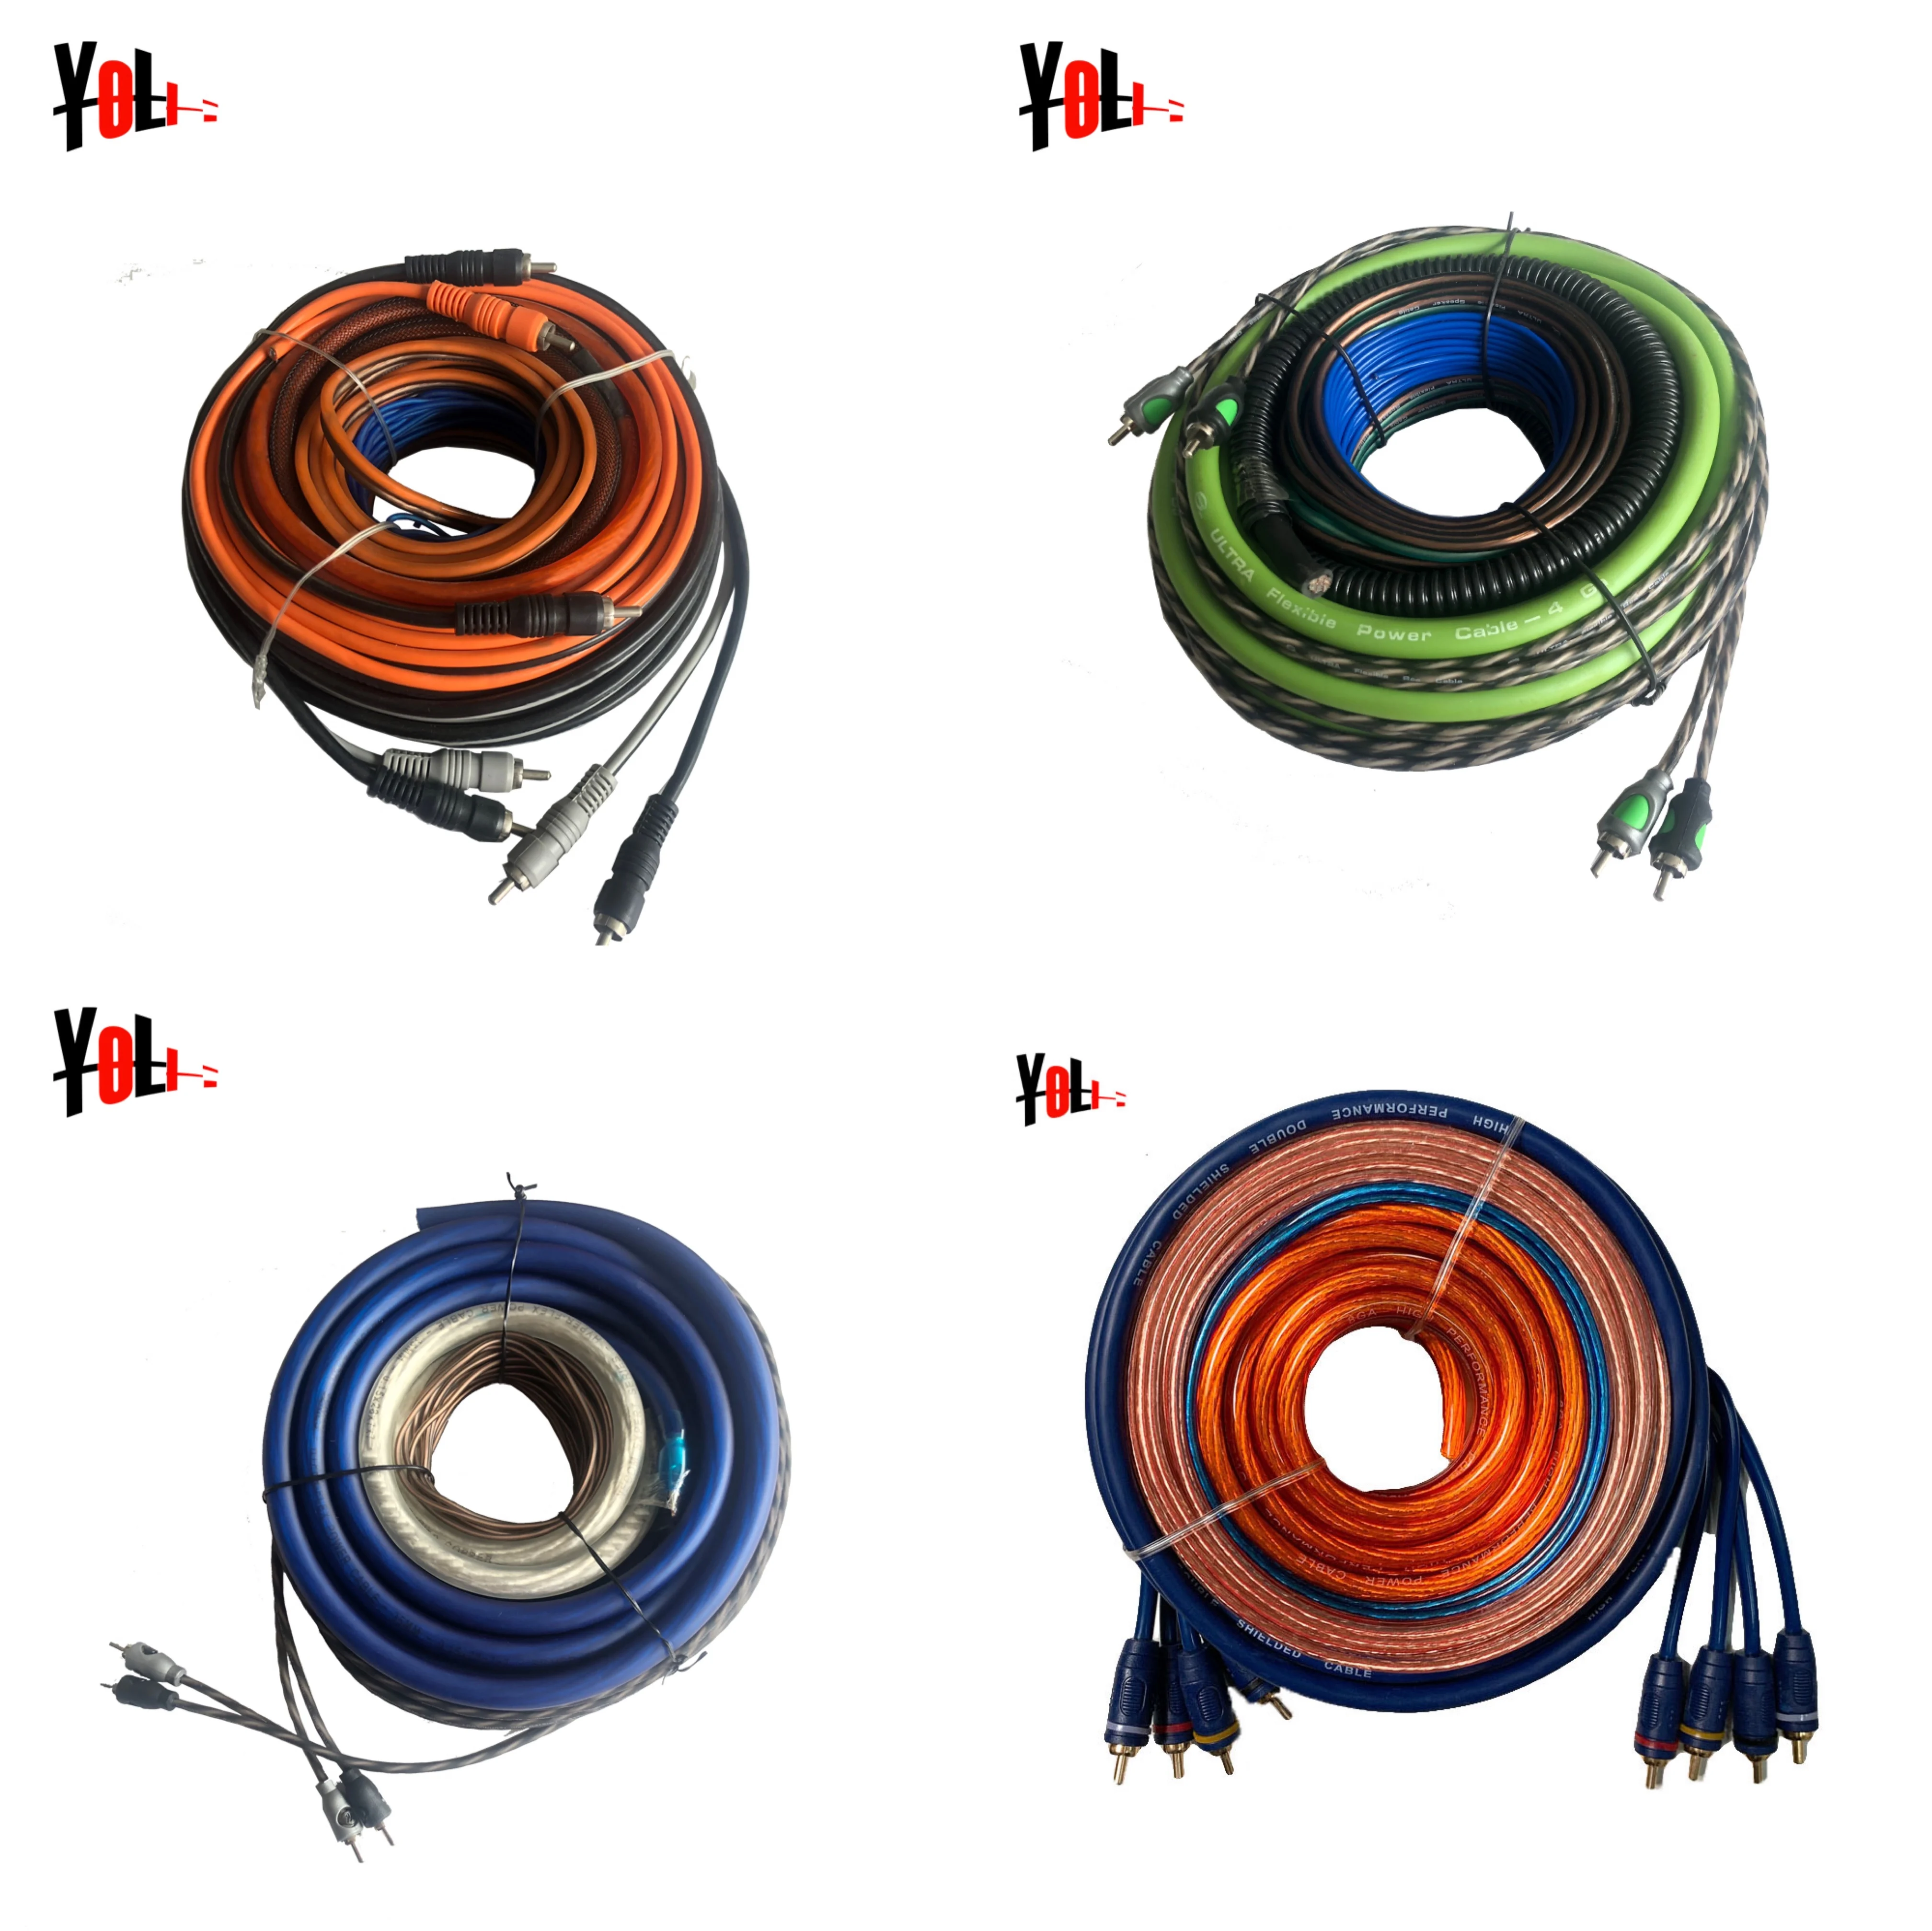 Beliebt 3000 watt 4 AWG amp wiring kits with colorful cable amp wiring kit in stone